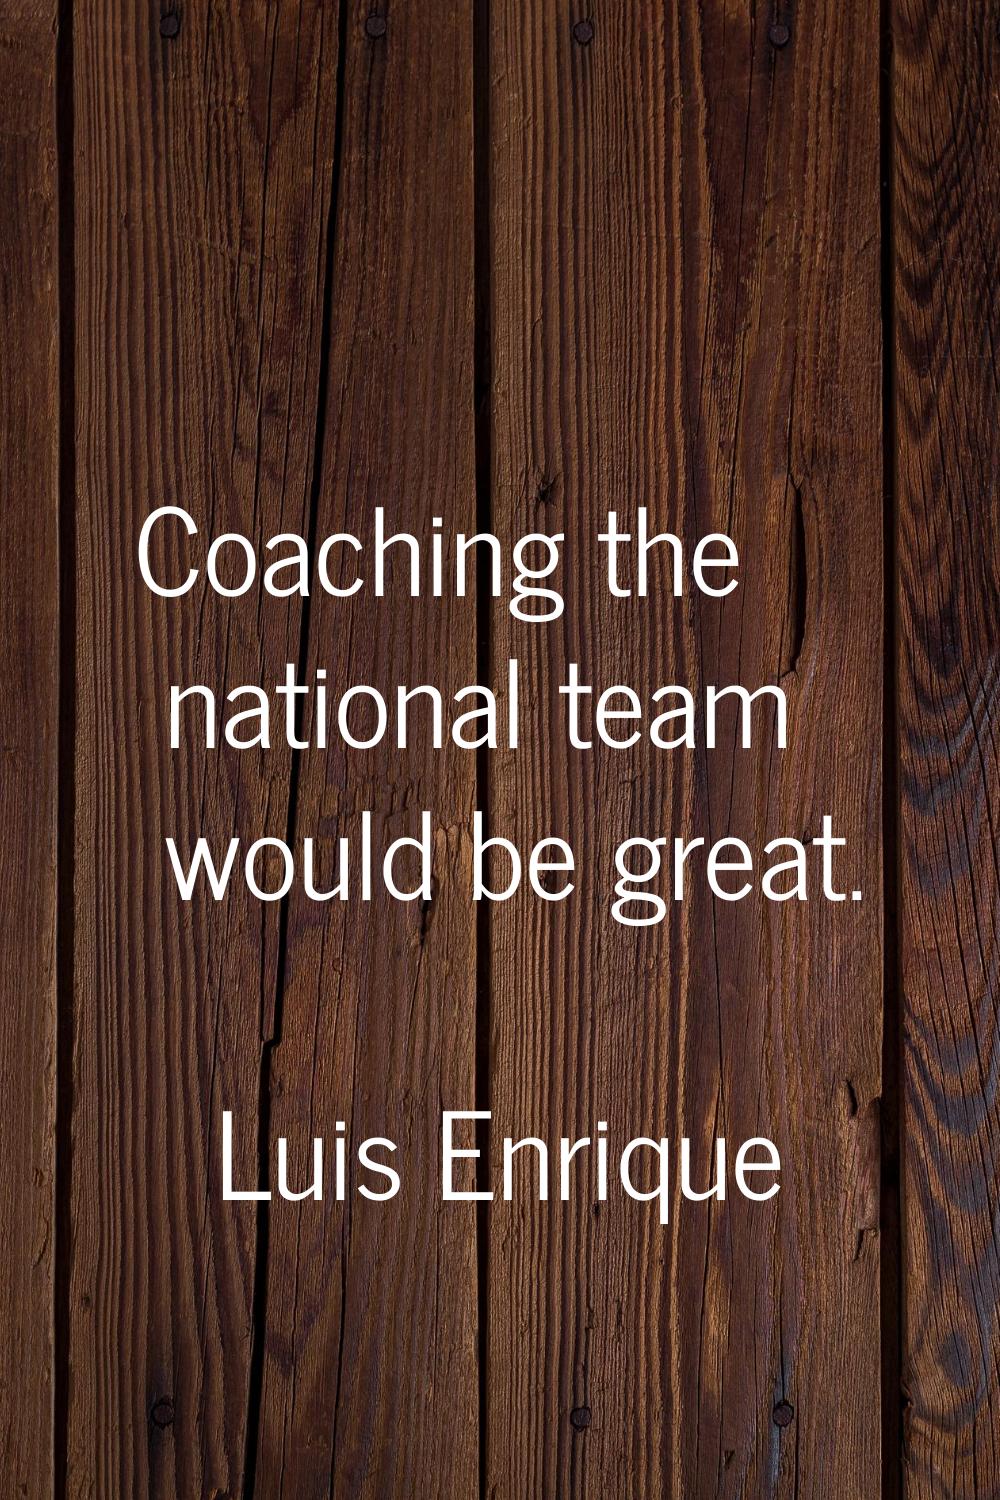 Coaching the national team would be great.